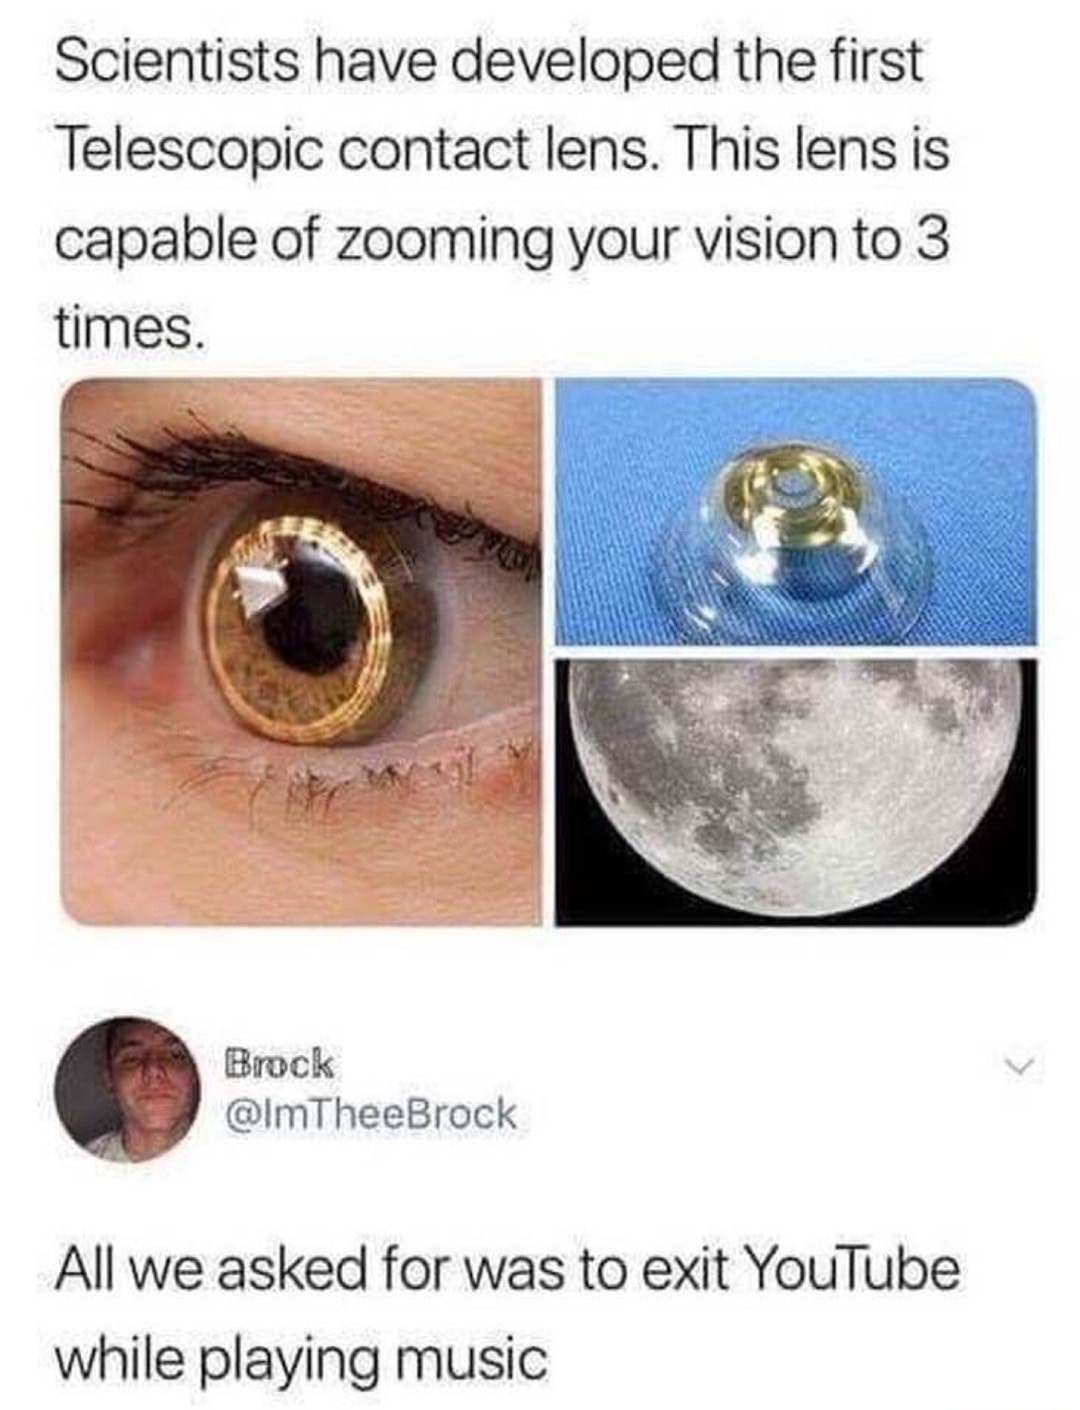 contact lense memes - Scientists have developed the first Telescopic contact lens. This lens is capable of zooming your vision to 3 times. Brock All we asked for was to exit YouTube while playing music